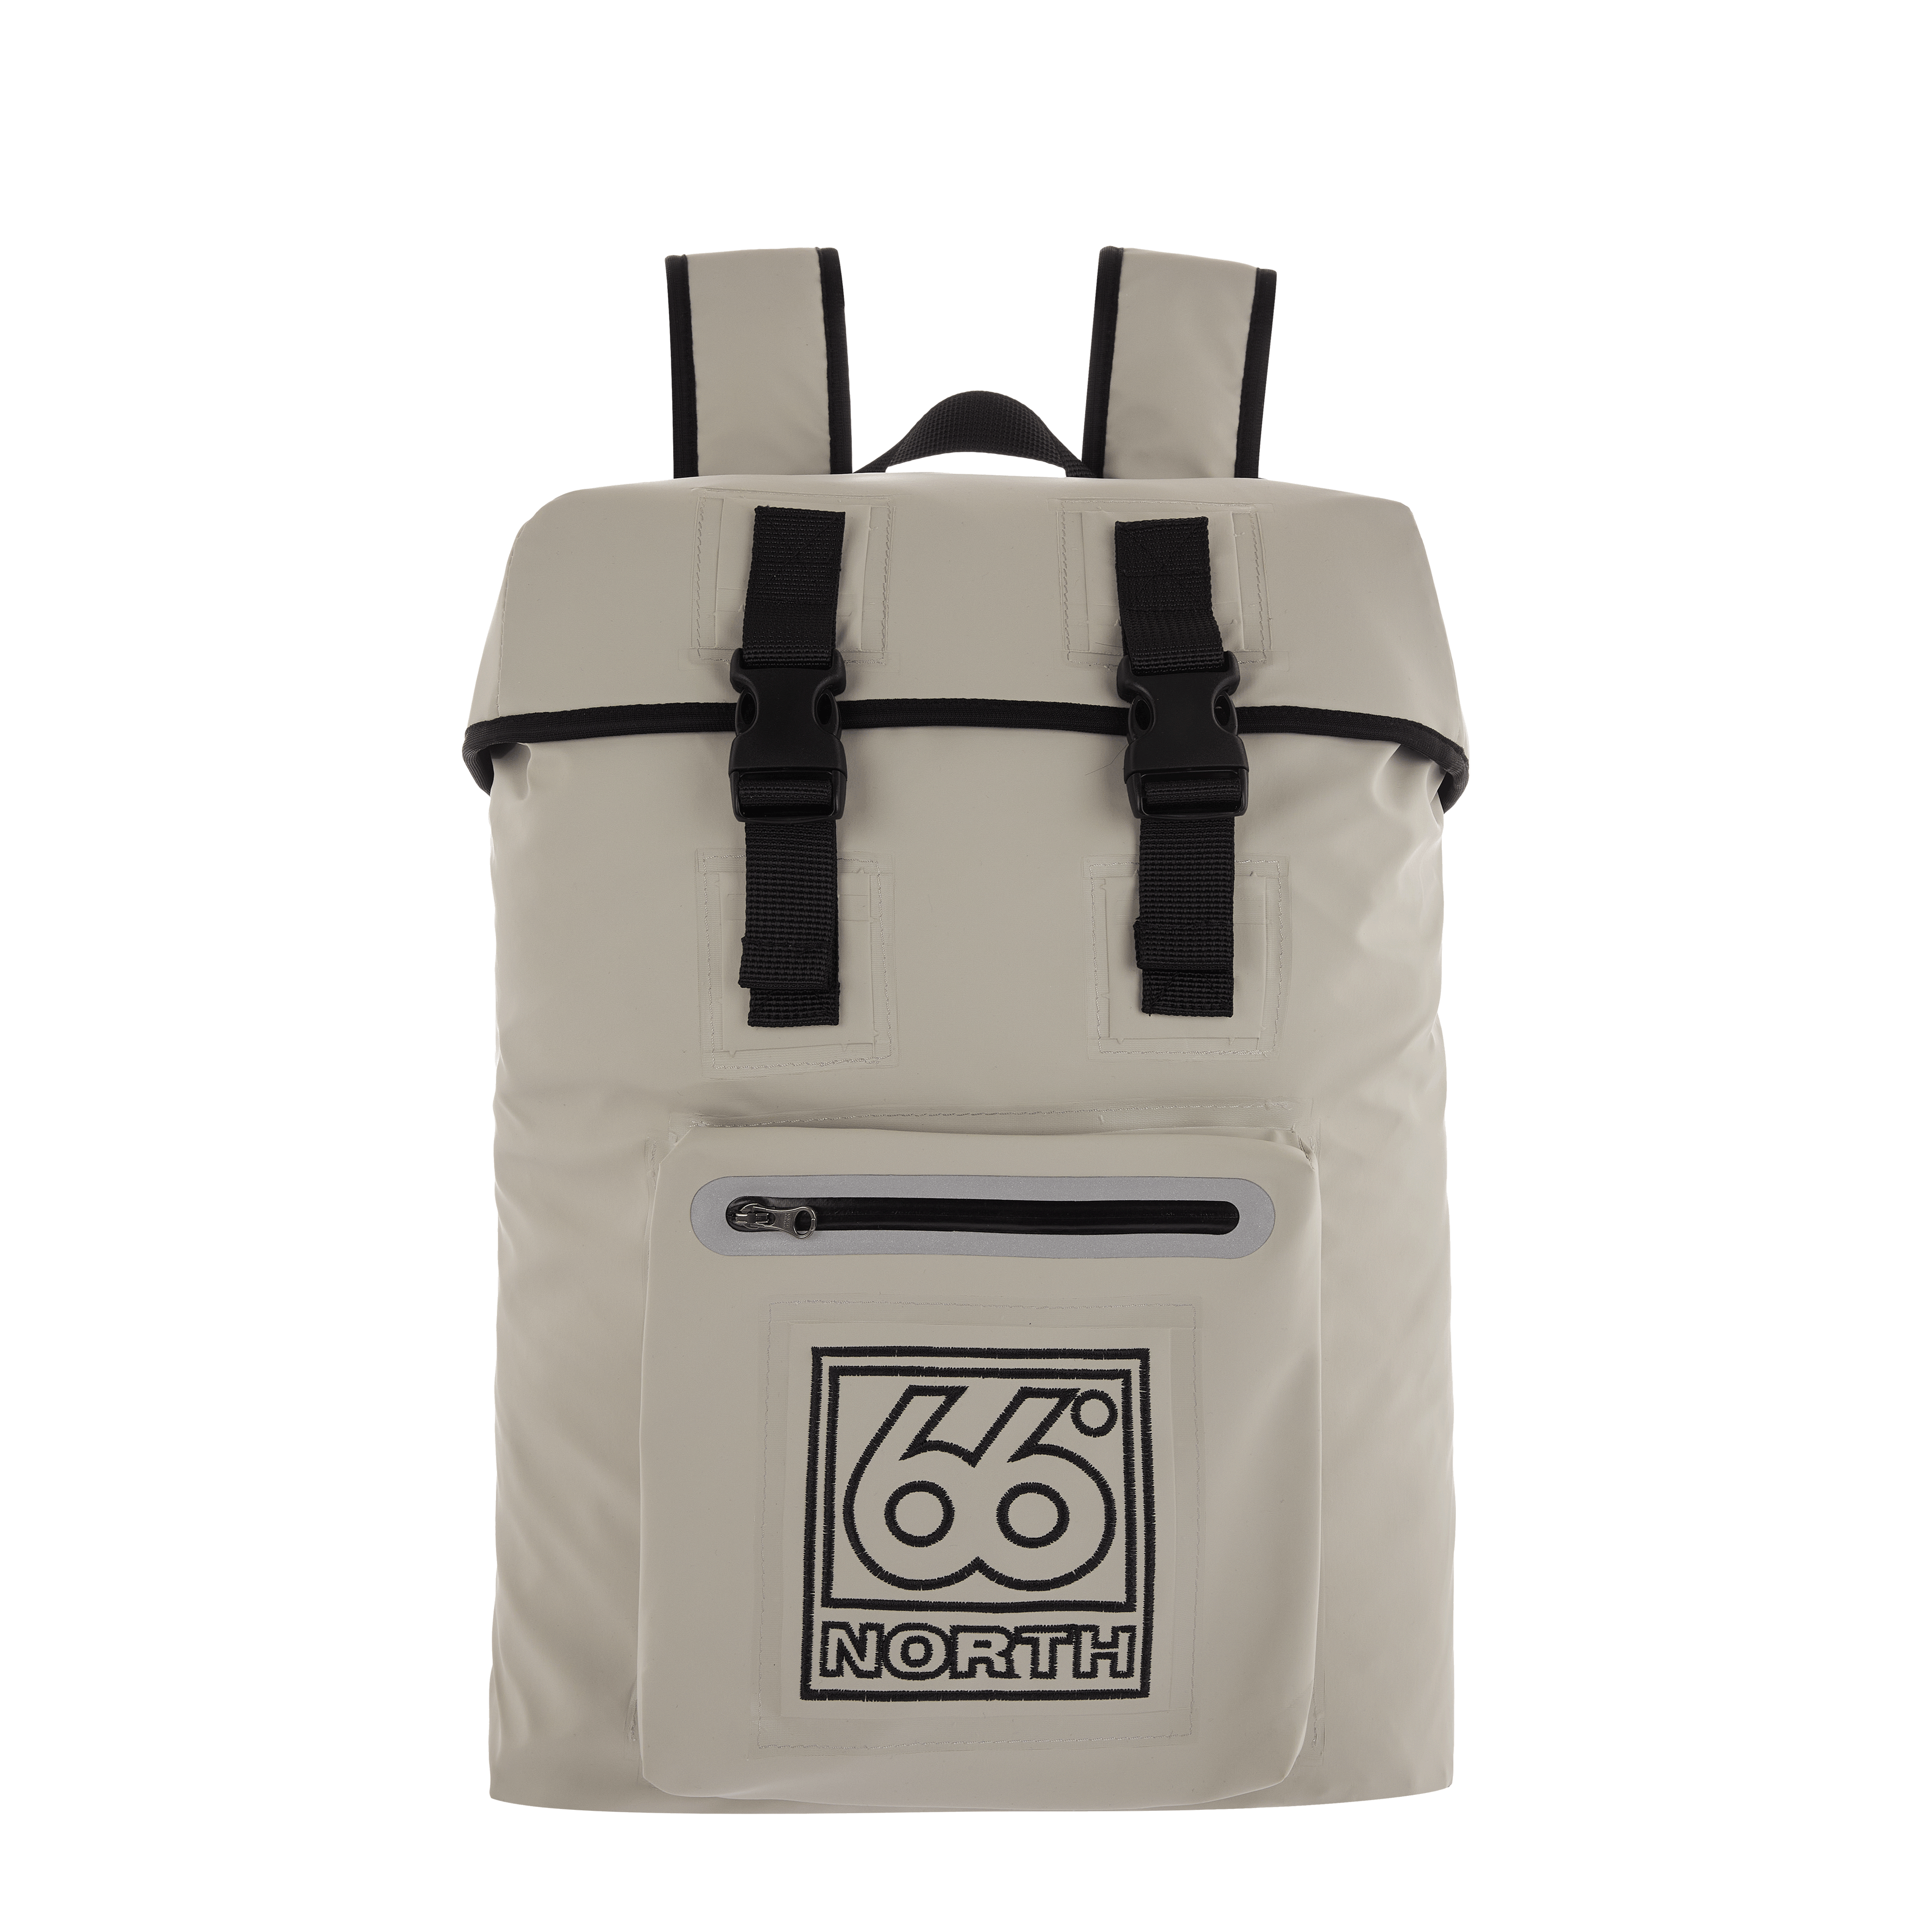 66 North Women's Backpack Accessories In Cold Desert